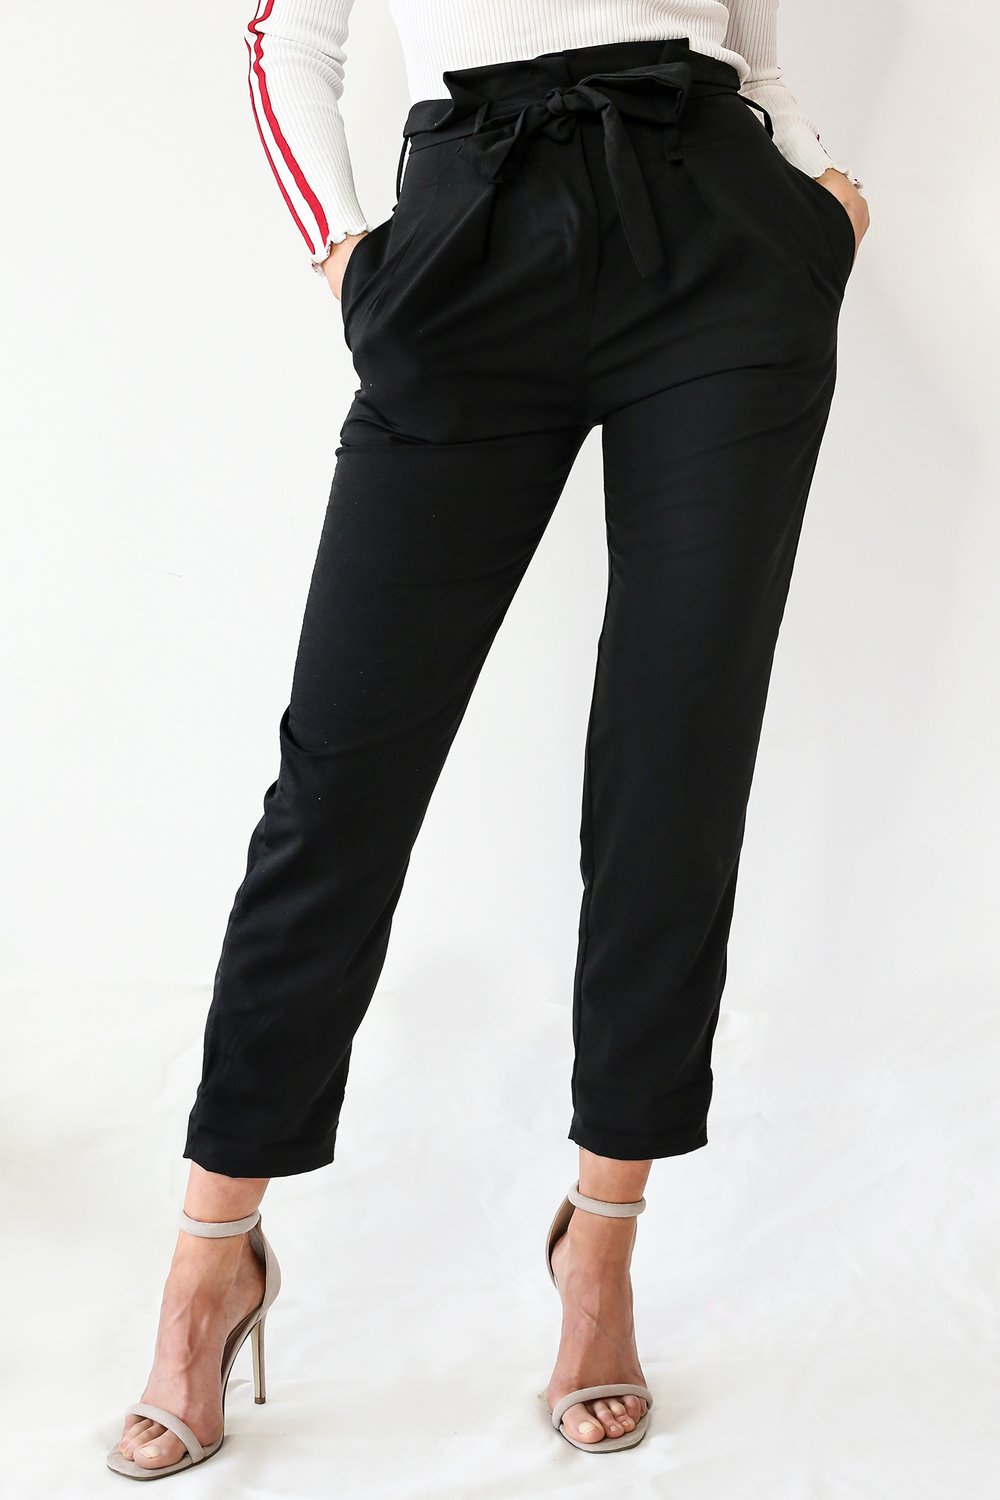 Image of groovy feeling black tapered trousers by TLO